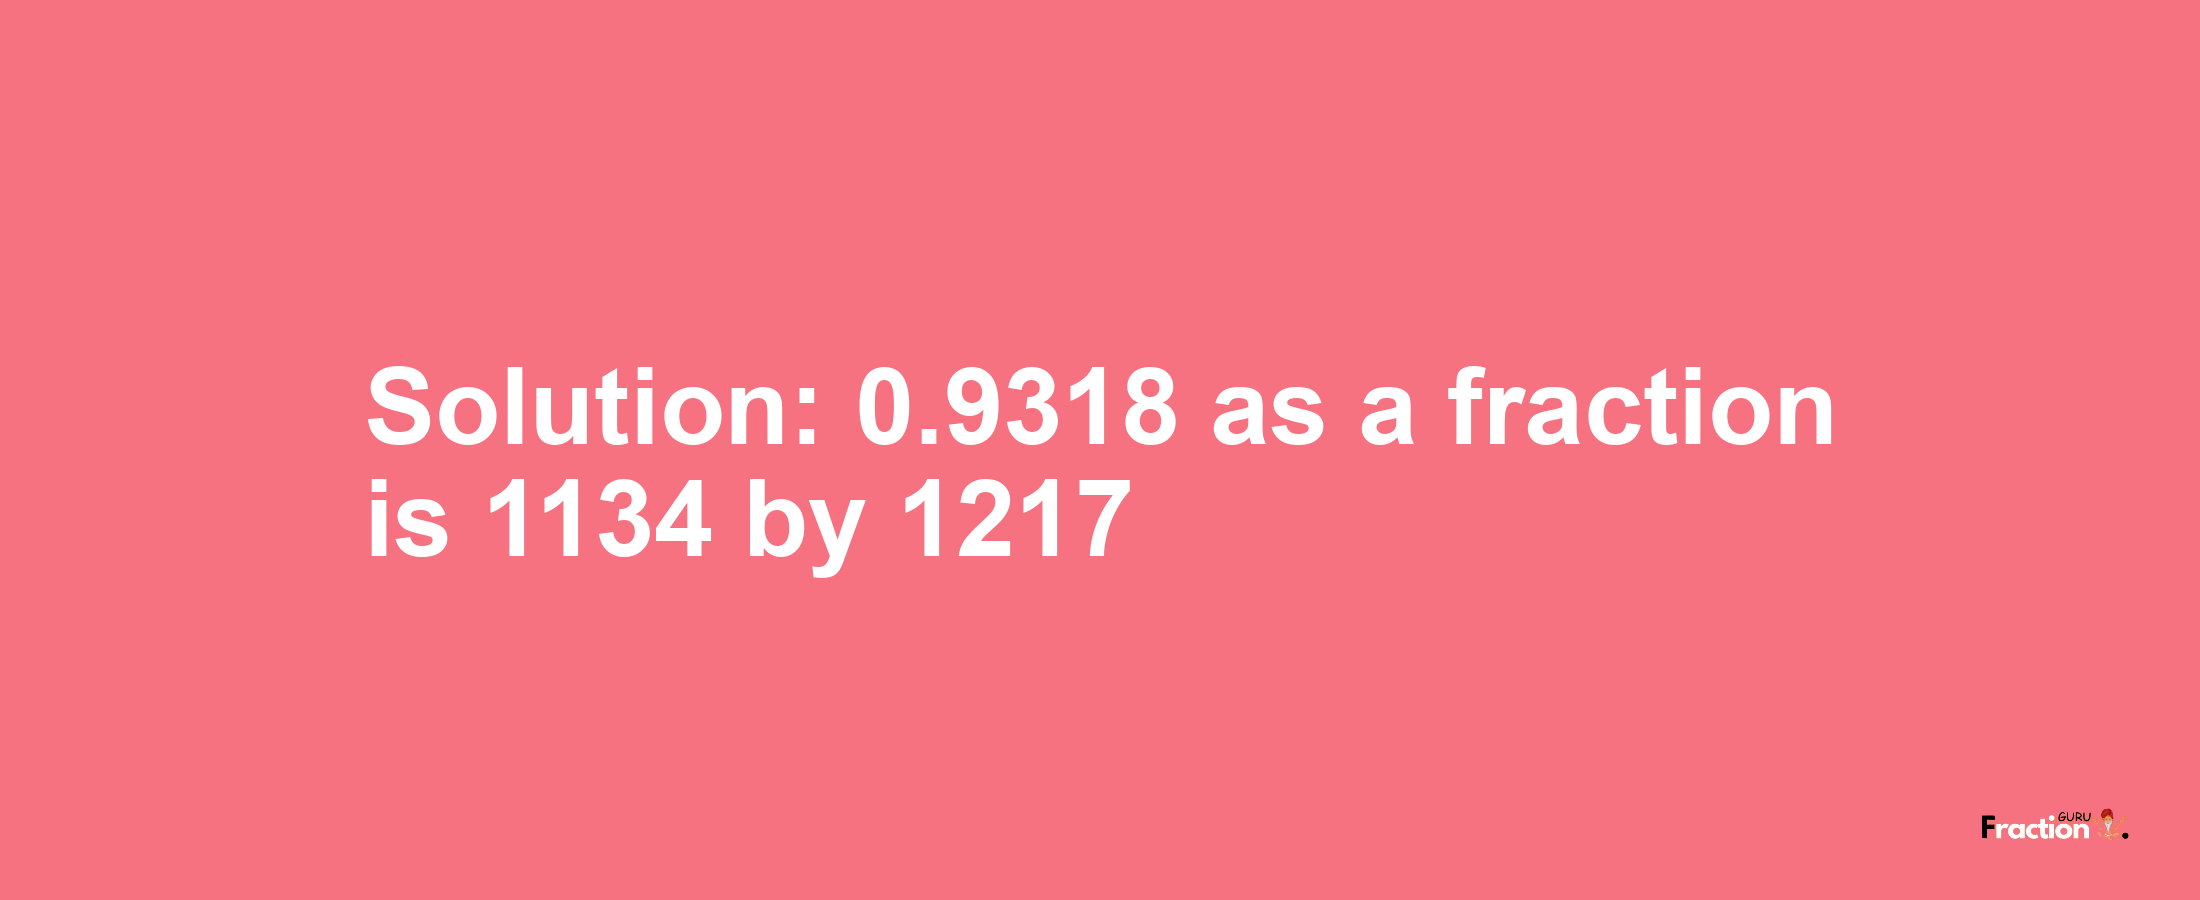 Solution:0.9318 as a fraction is 1134/1217